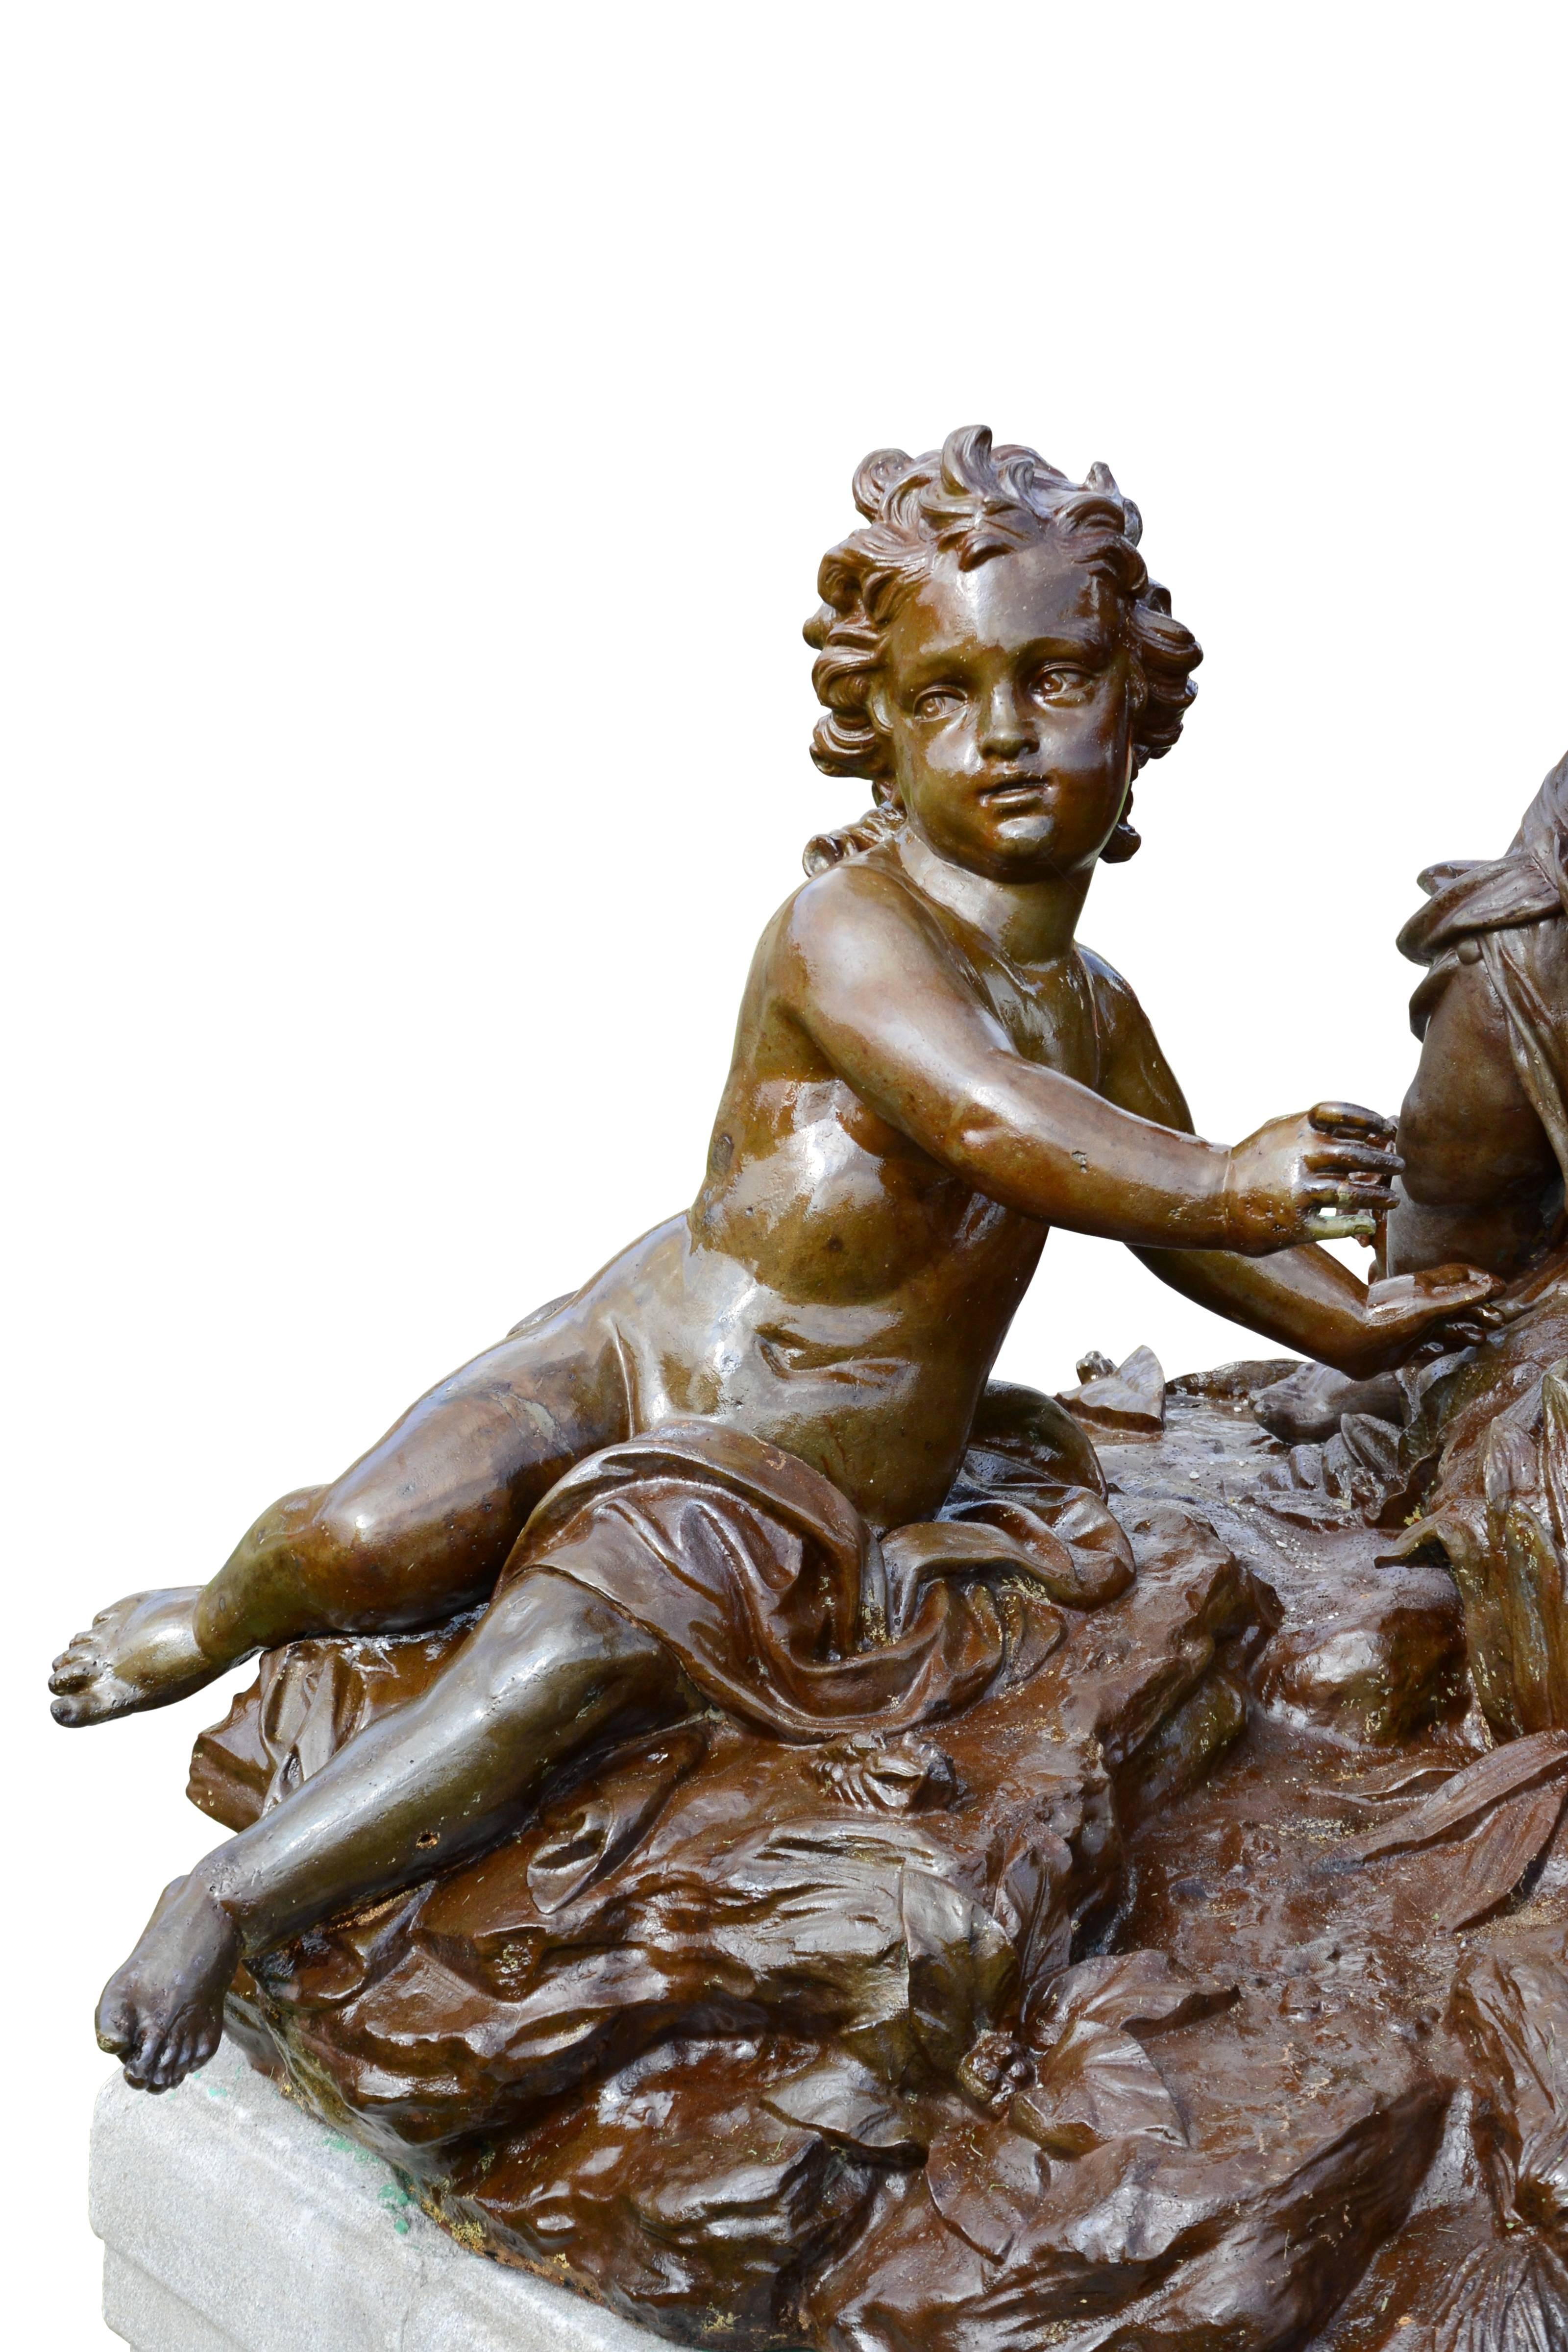 Dated from the 19th century, important cast iron group of putti resting on an octagonal molded granite pedestal. This group represents four children crowned with roses, playing in the reeds and holding flowers in their hands. Lightly clothed, the